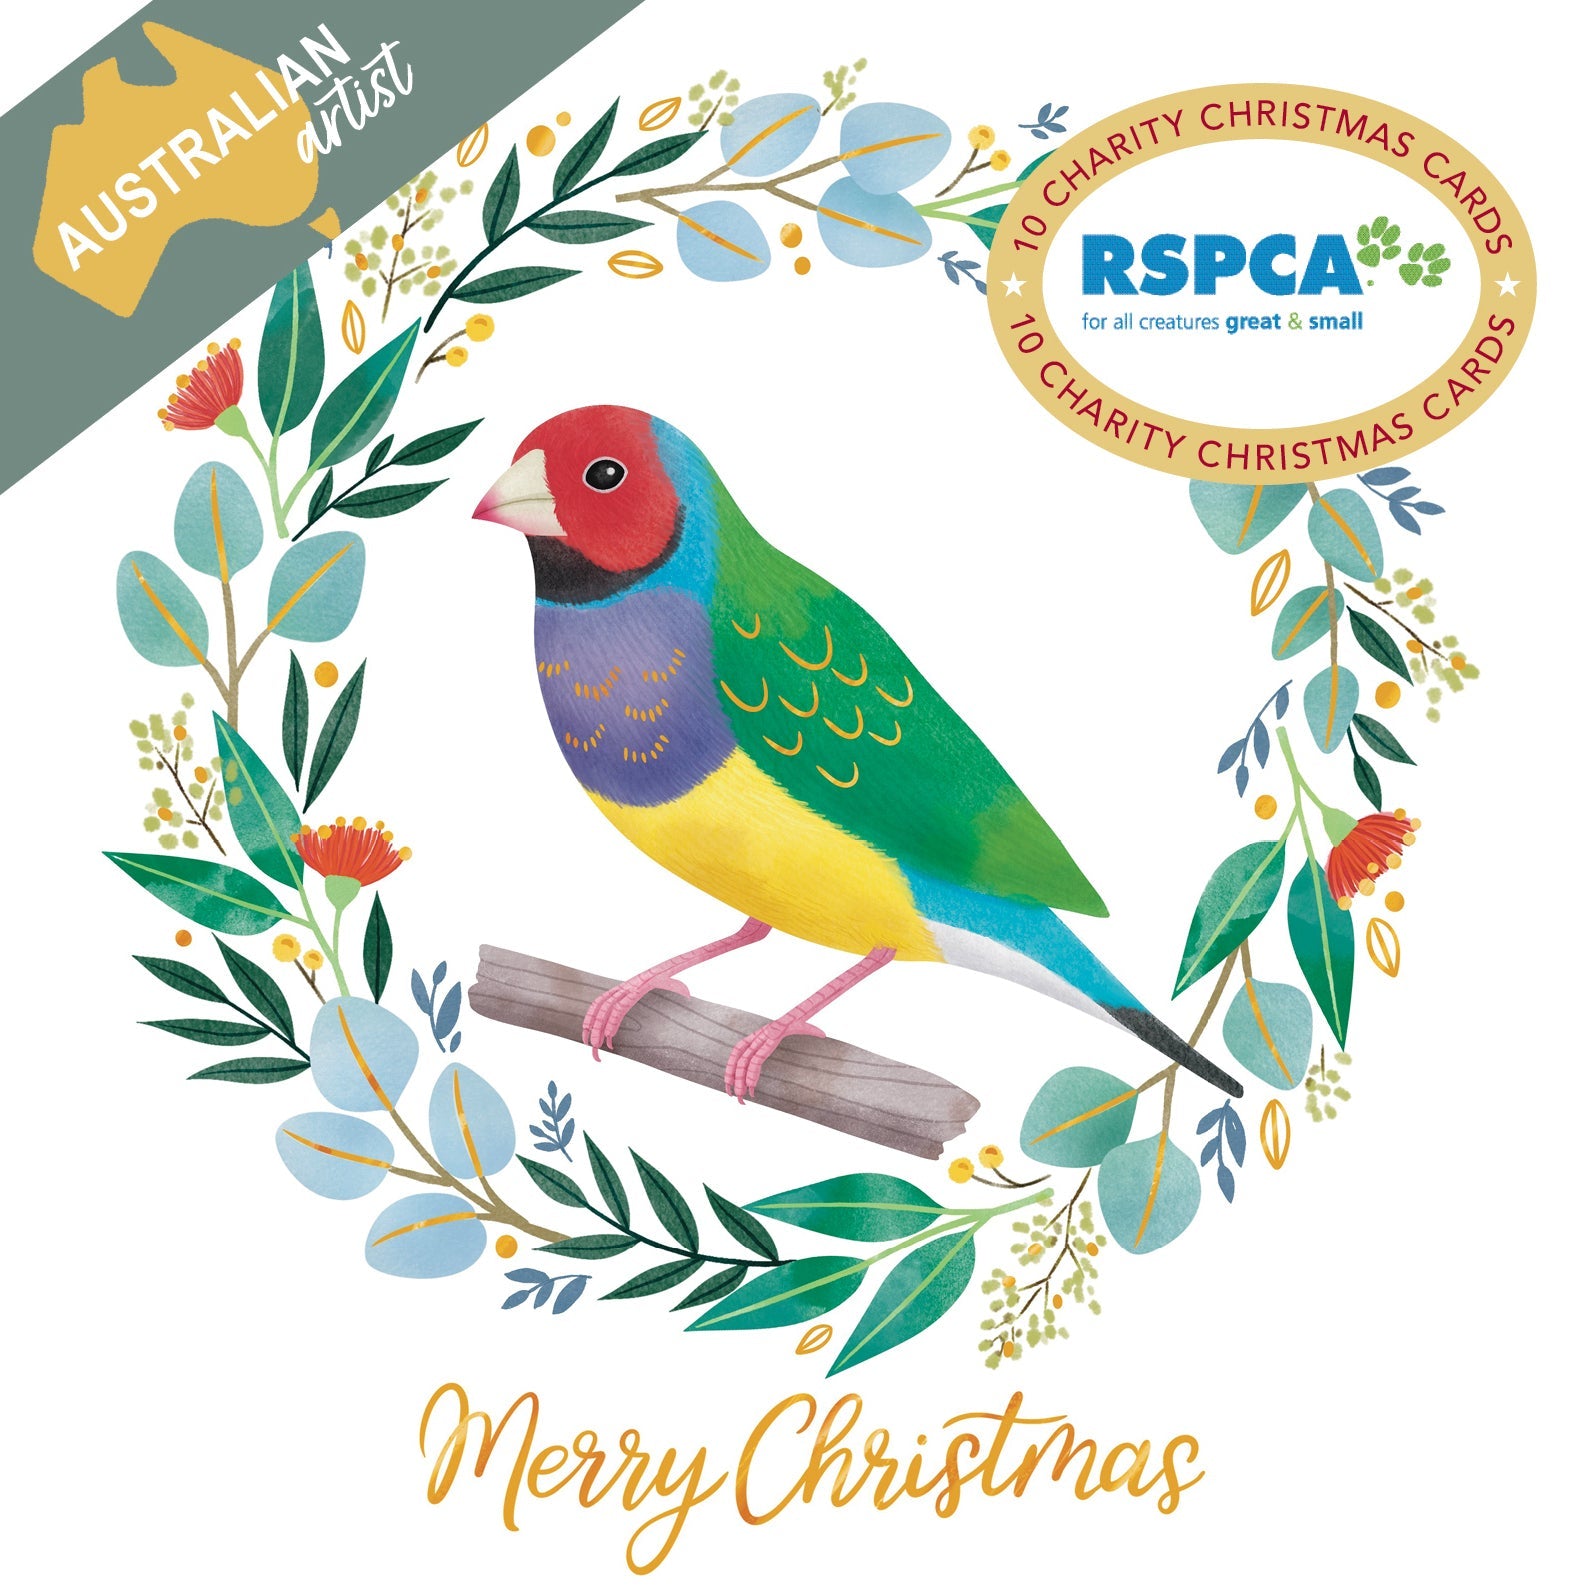 RSPCA Gouldian Finch Wreath - 10 Charity Christmas Cards Pack